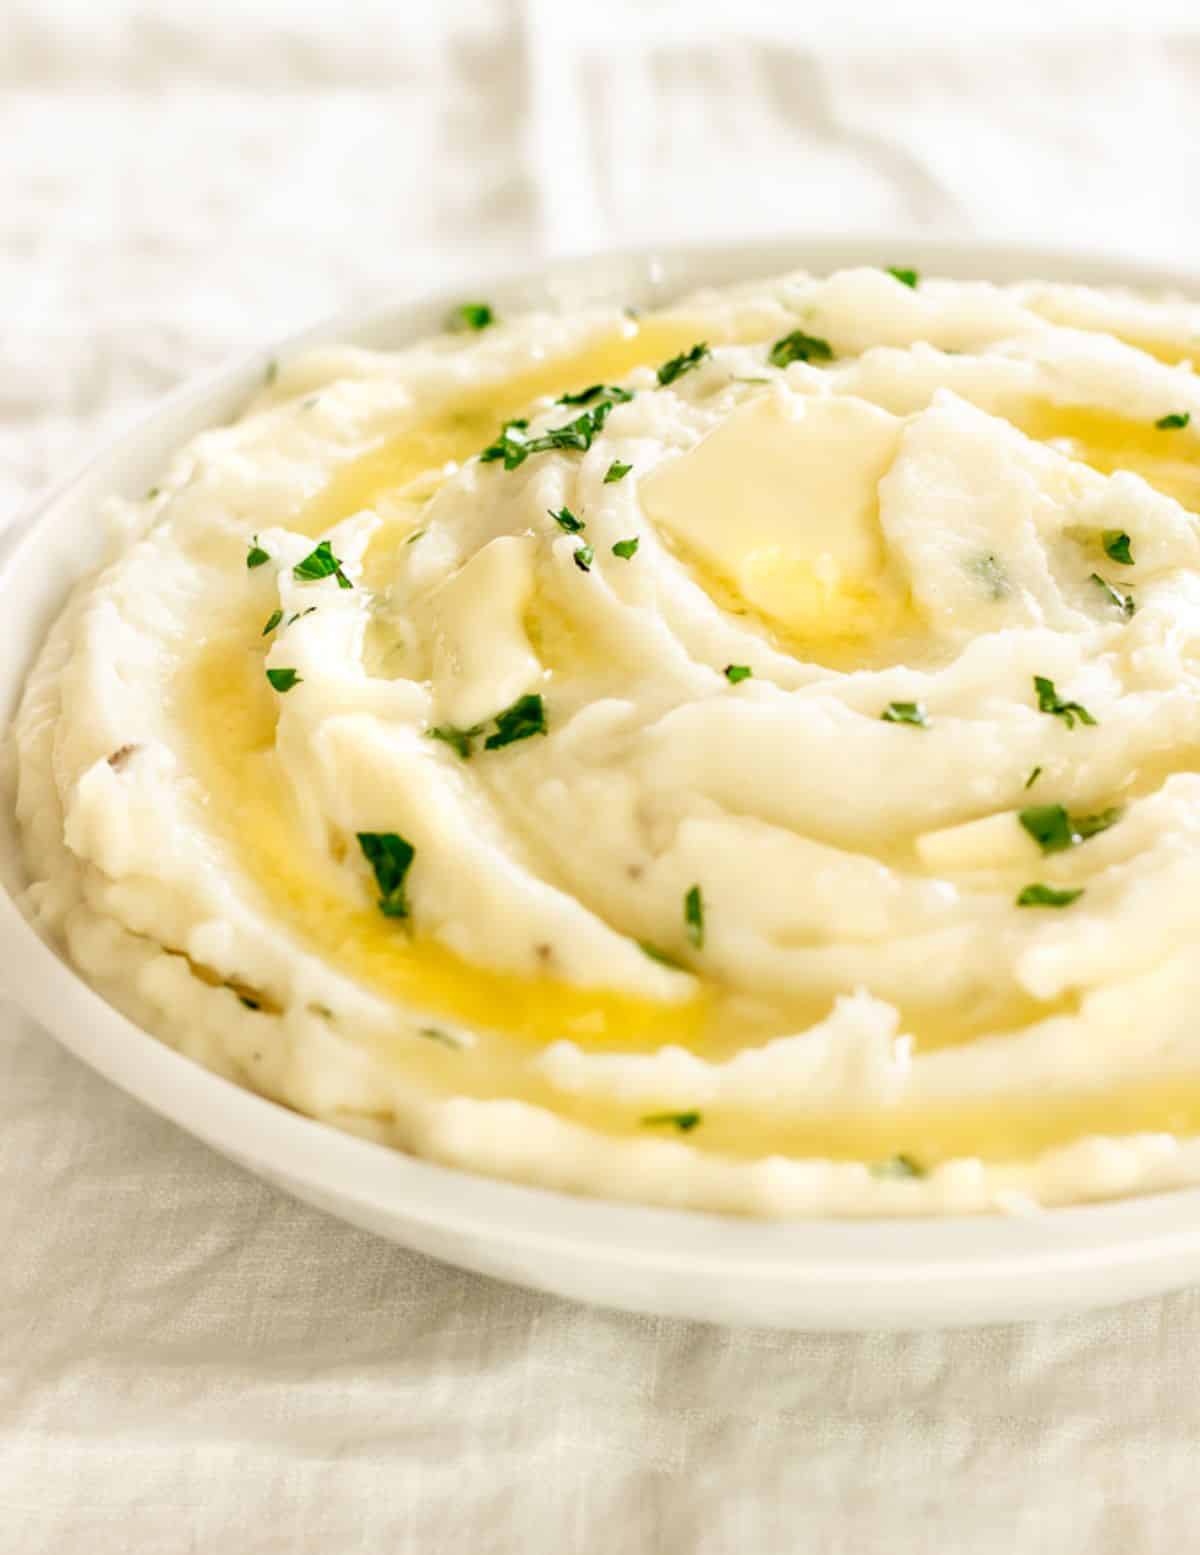 Creamy Sour Cream Mashed Potatoes in a white bowl.